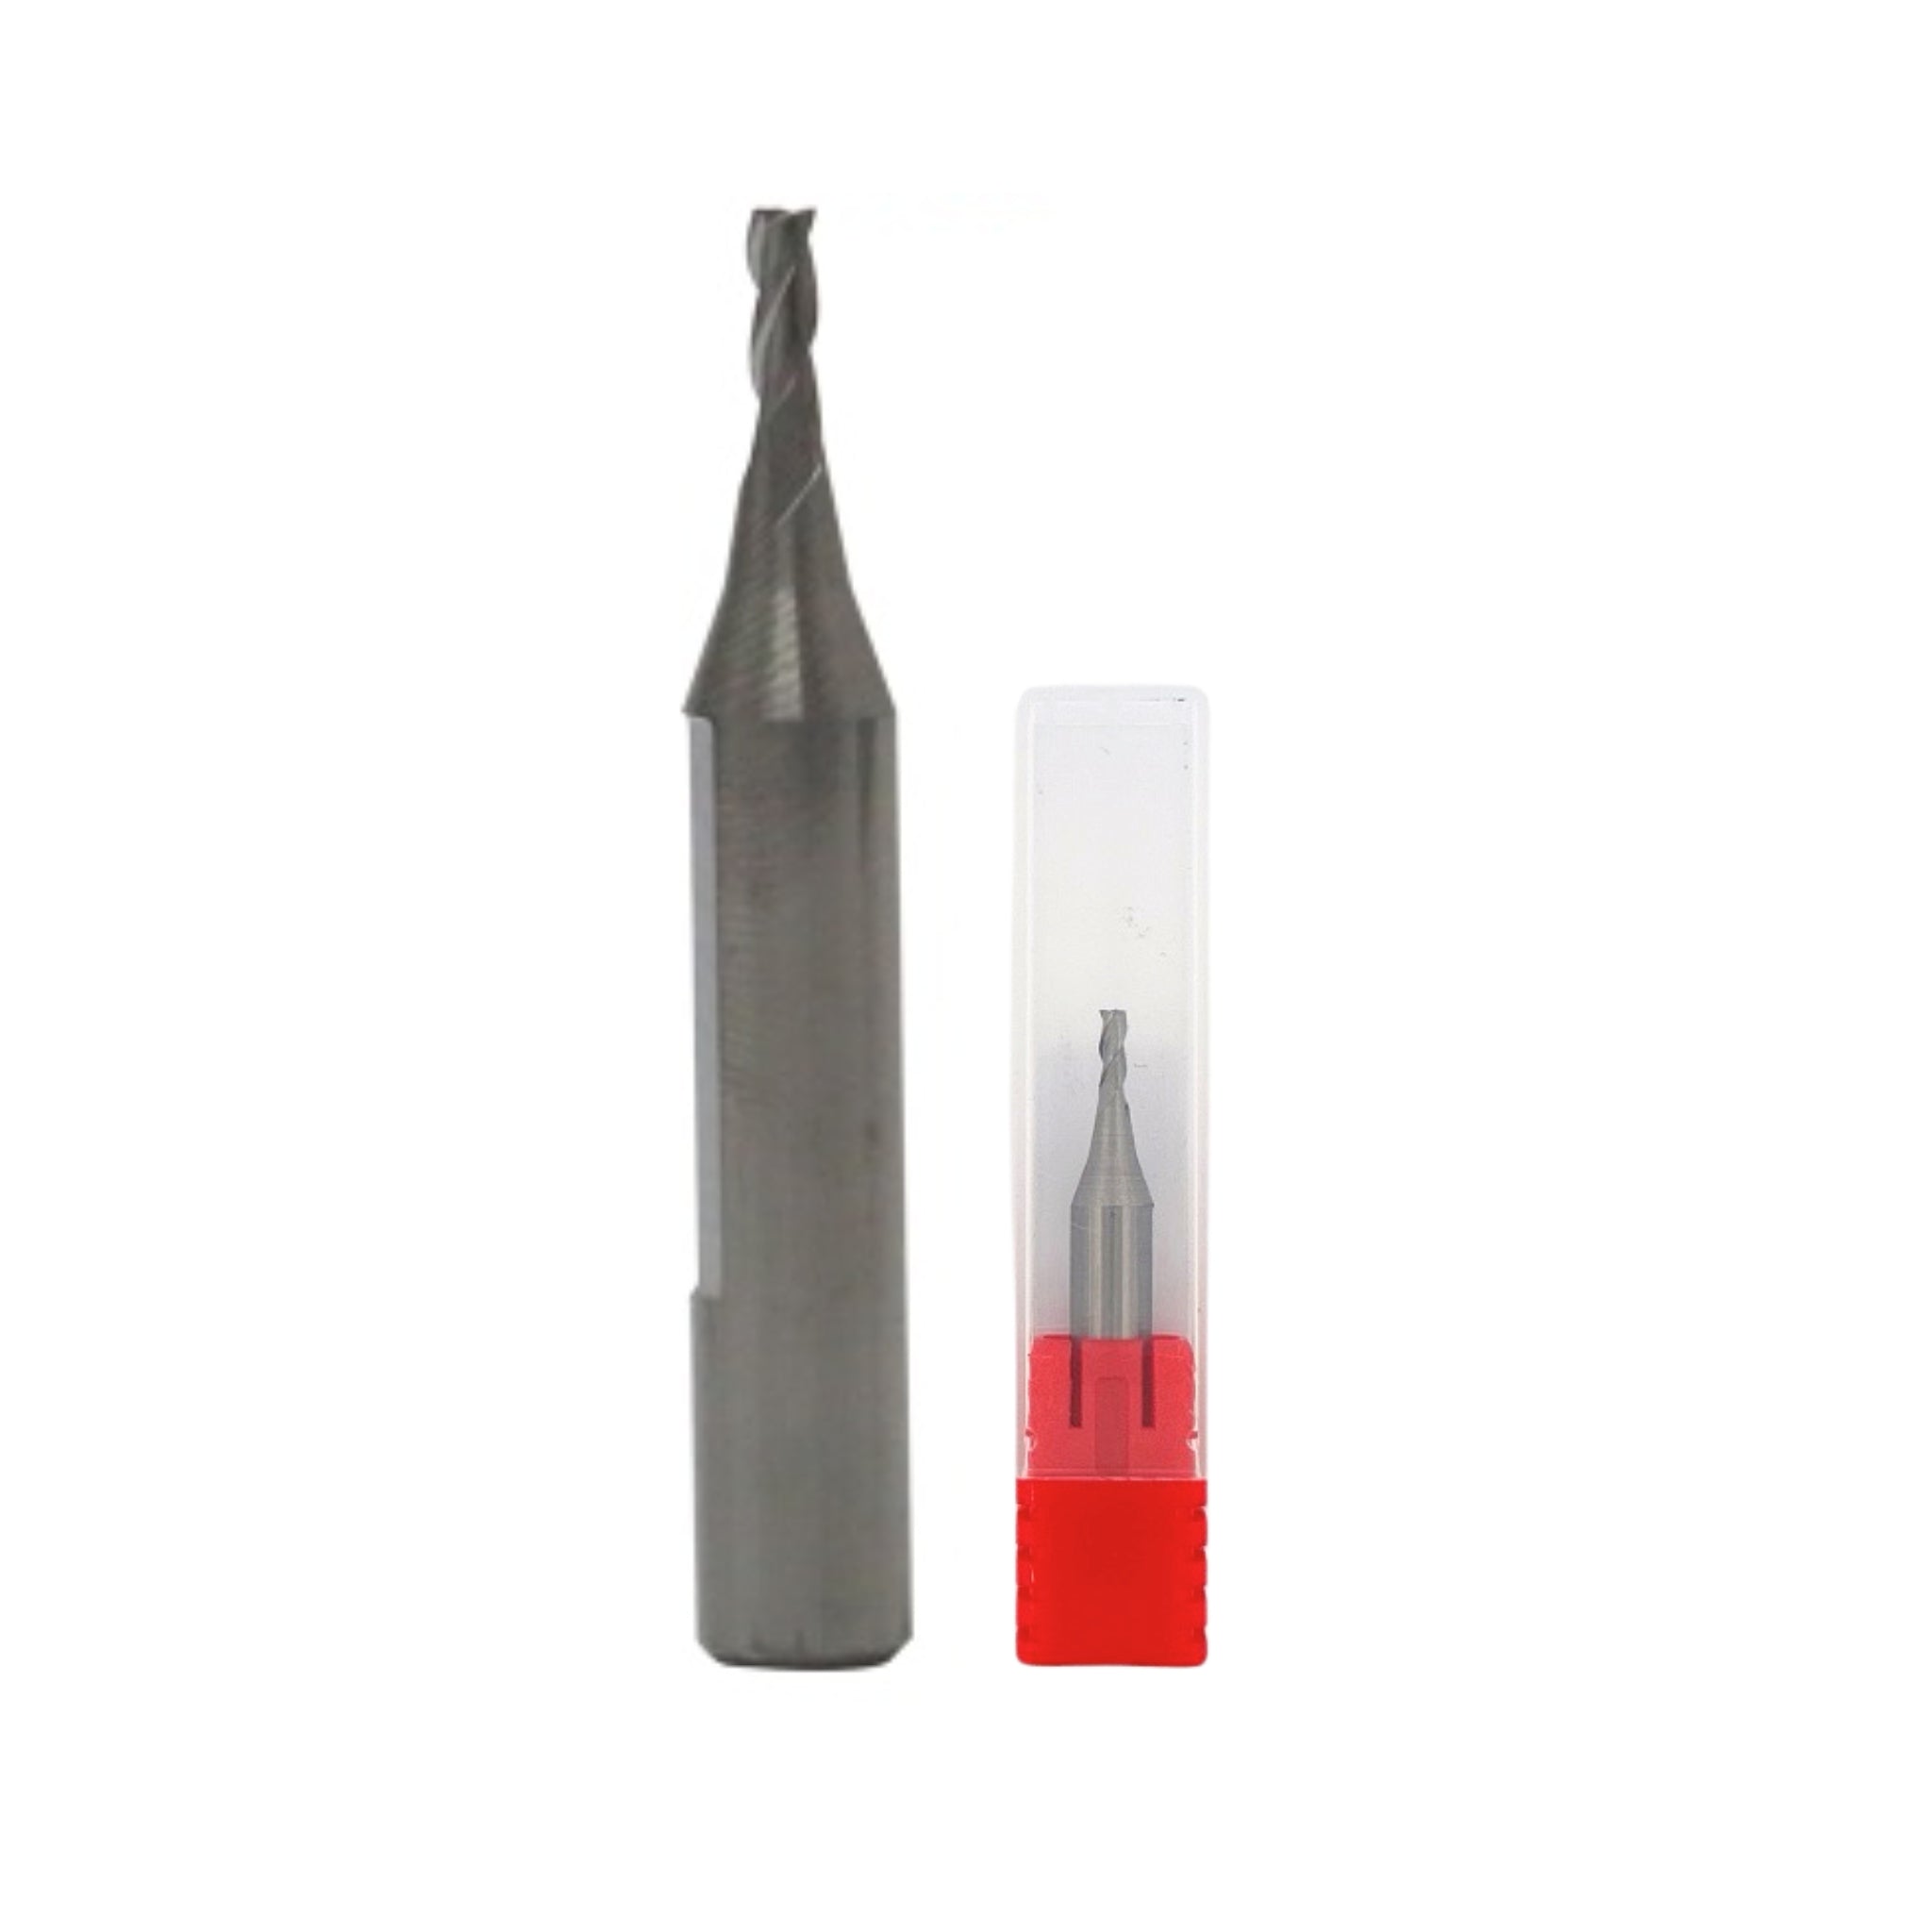 RAISE - Solid Carbide End Mill Cutter/Tracer Point (2mm) P-3123 for Miracle A7/A9, SEC-E9, Condor